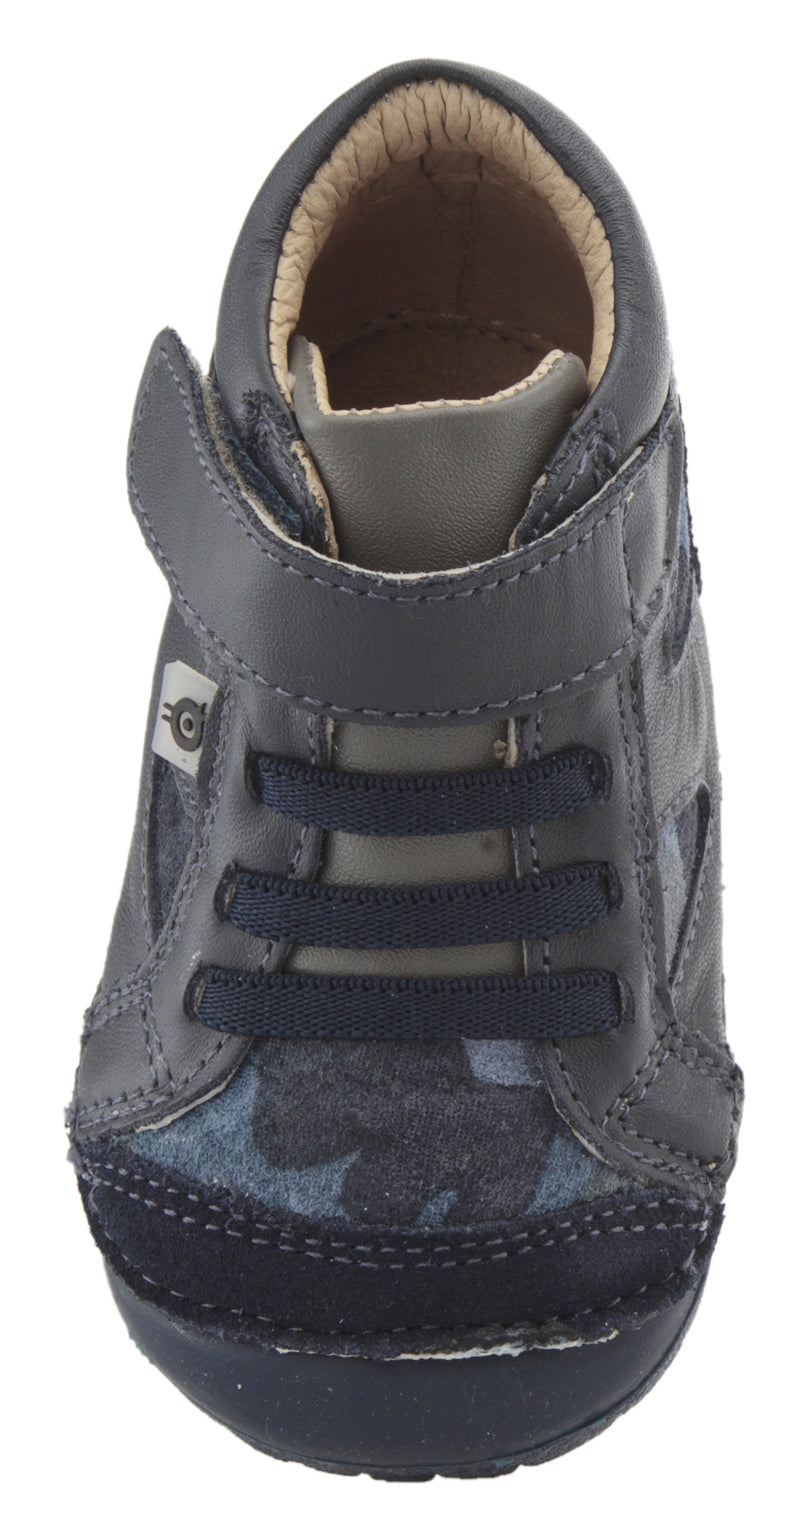 Old Soles Boy's 4049 Pave Squad Sneakers - Navy/Marine Camo/Grey